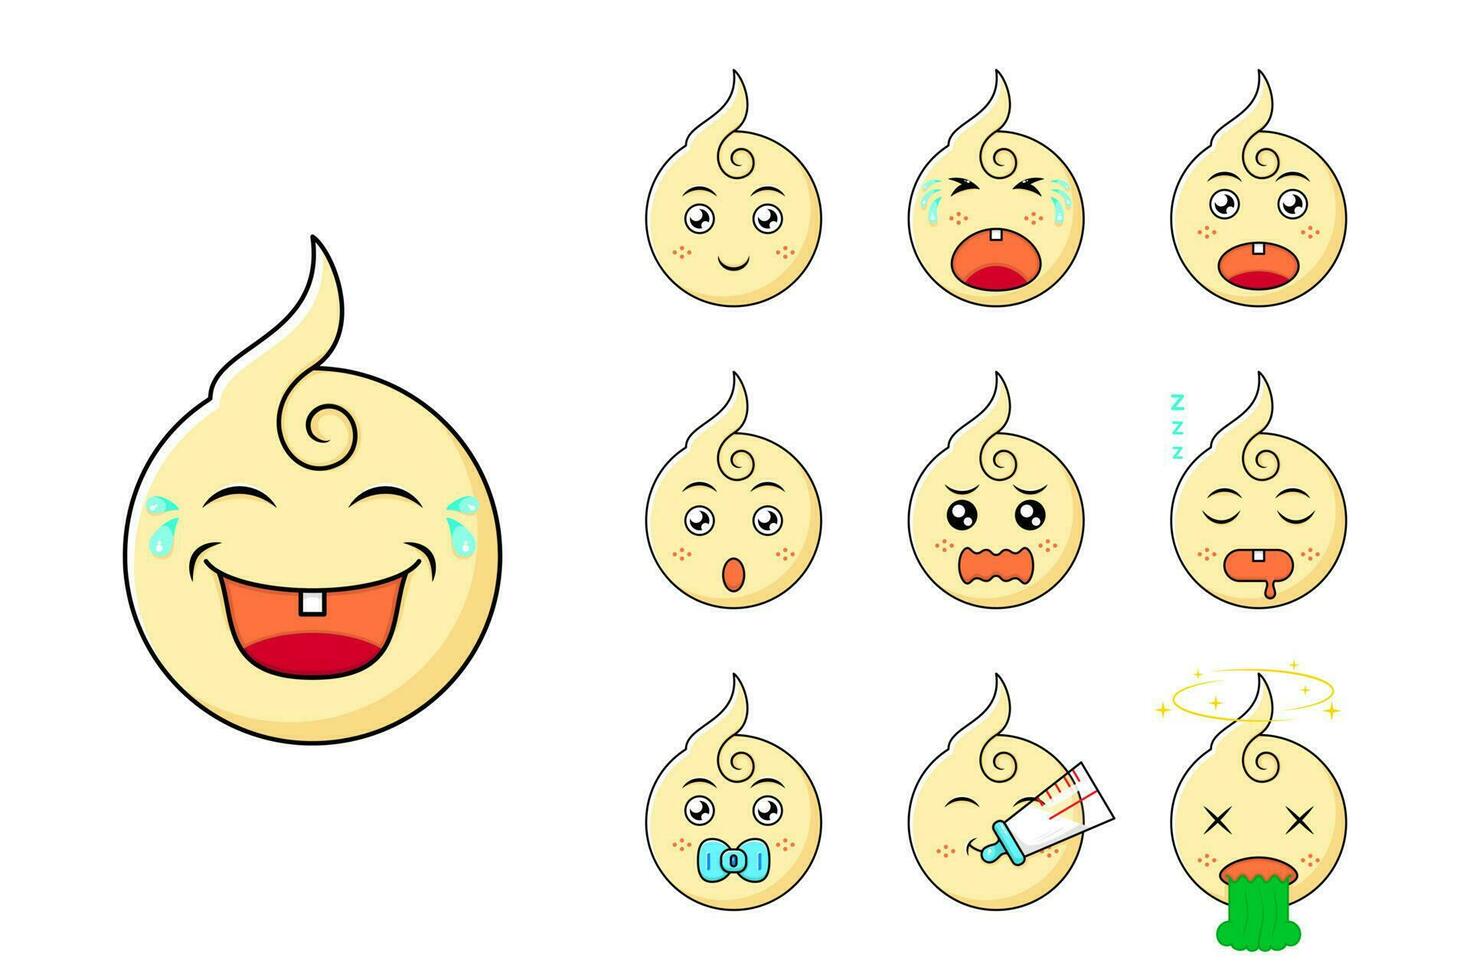 set of baby emoticon expressions. illustrations of baby faces showing different emotions. laugh, smile, confused, sad, cry, hurt, drink, pacifier, happy. used for icons, stickers or logos vector